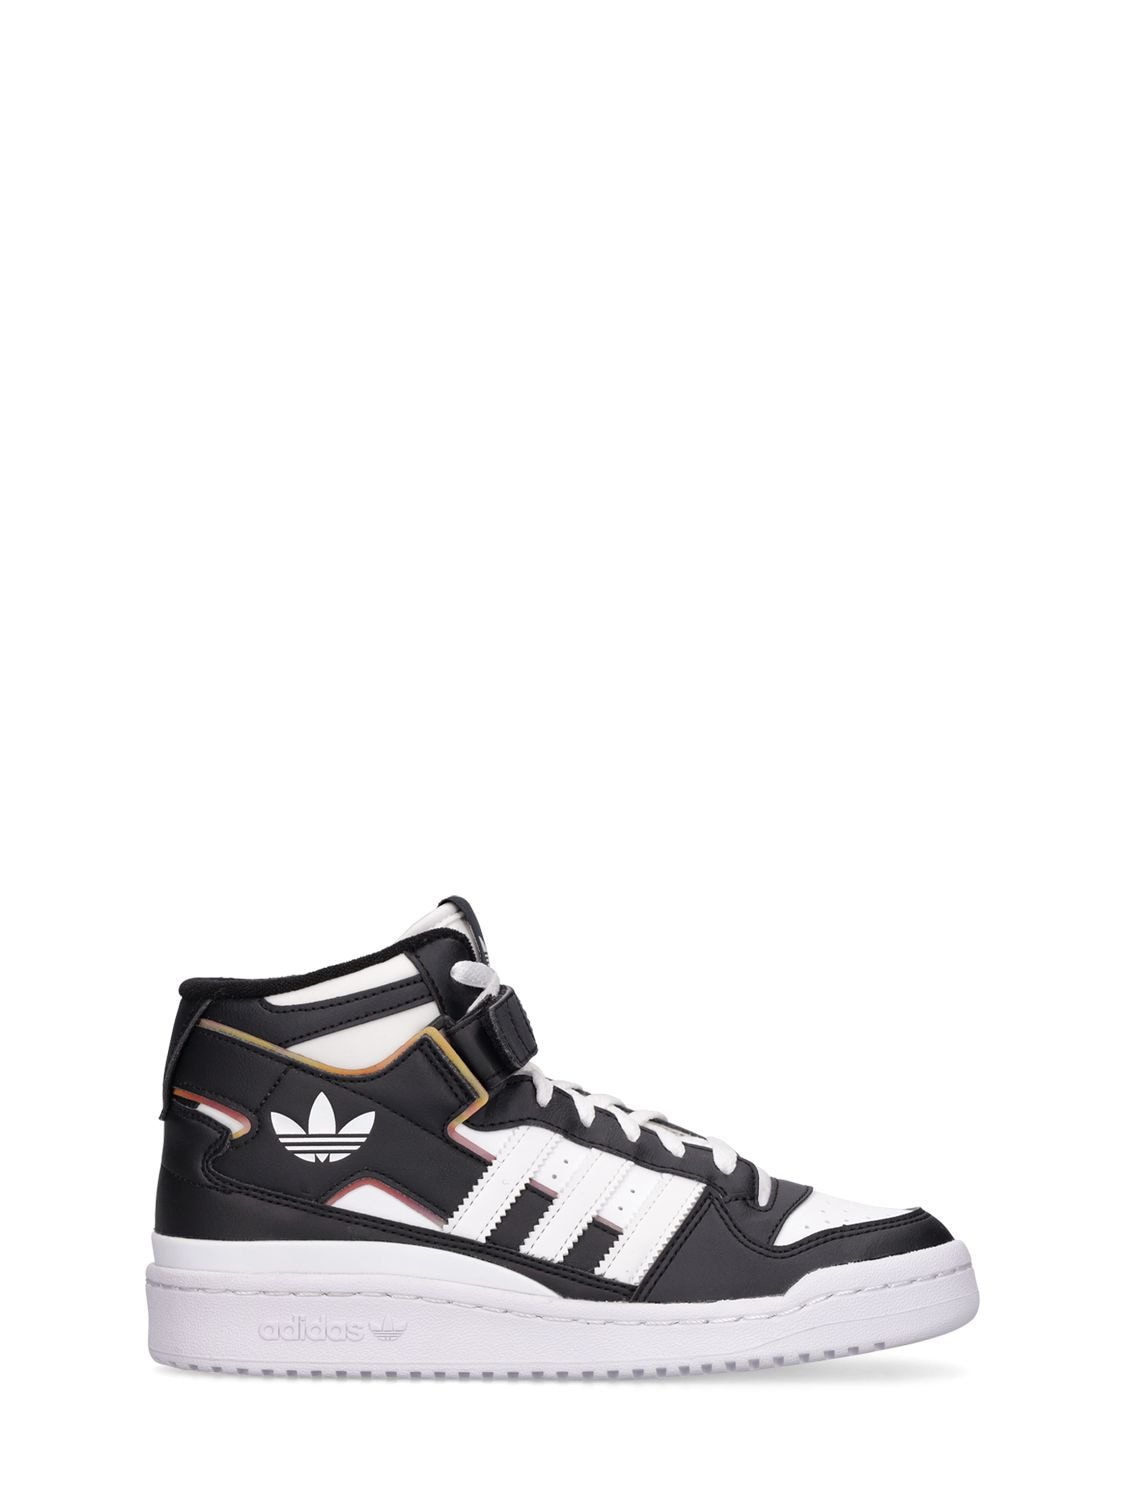 ADIDAS ORIGINALS FORUM MID FAUX LEATHER SNEAKERS